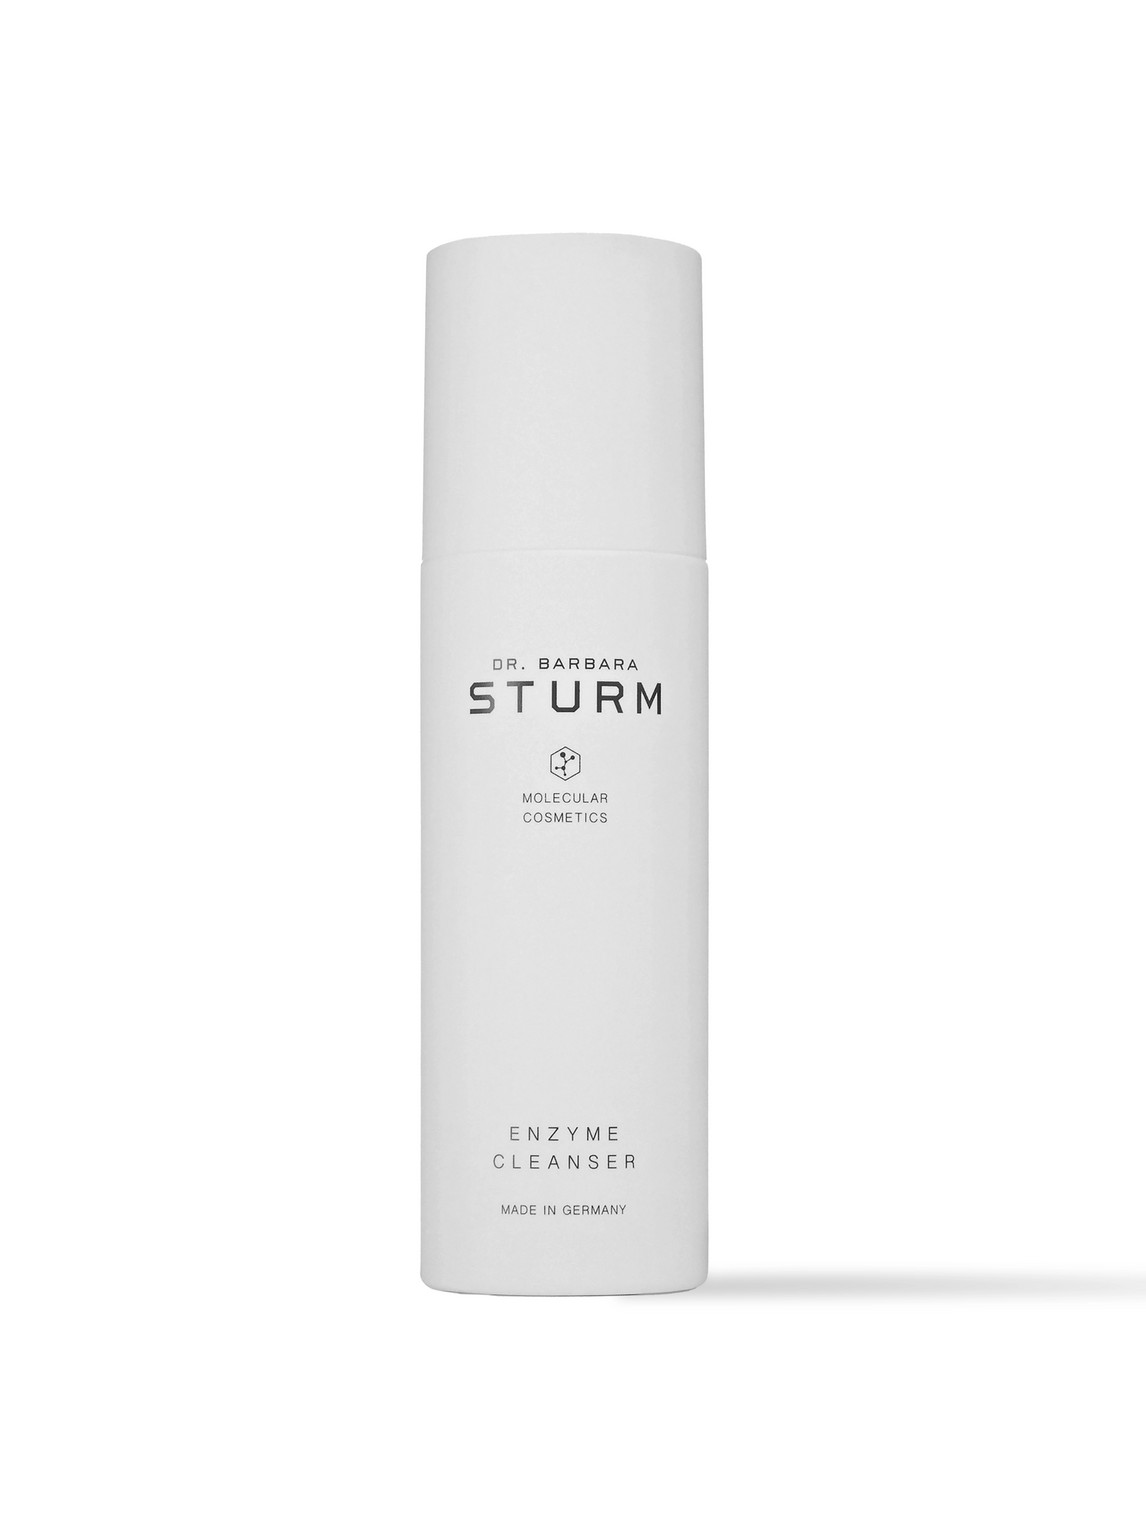 Dr Barbara Sturm Enzyme Cleanser, 75g In Colorless